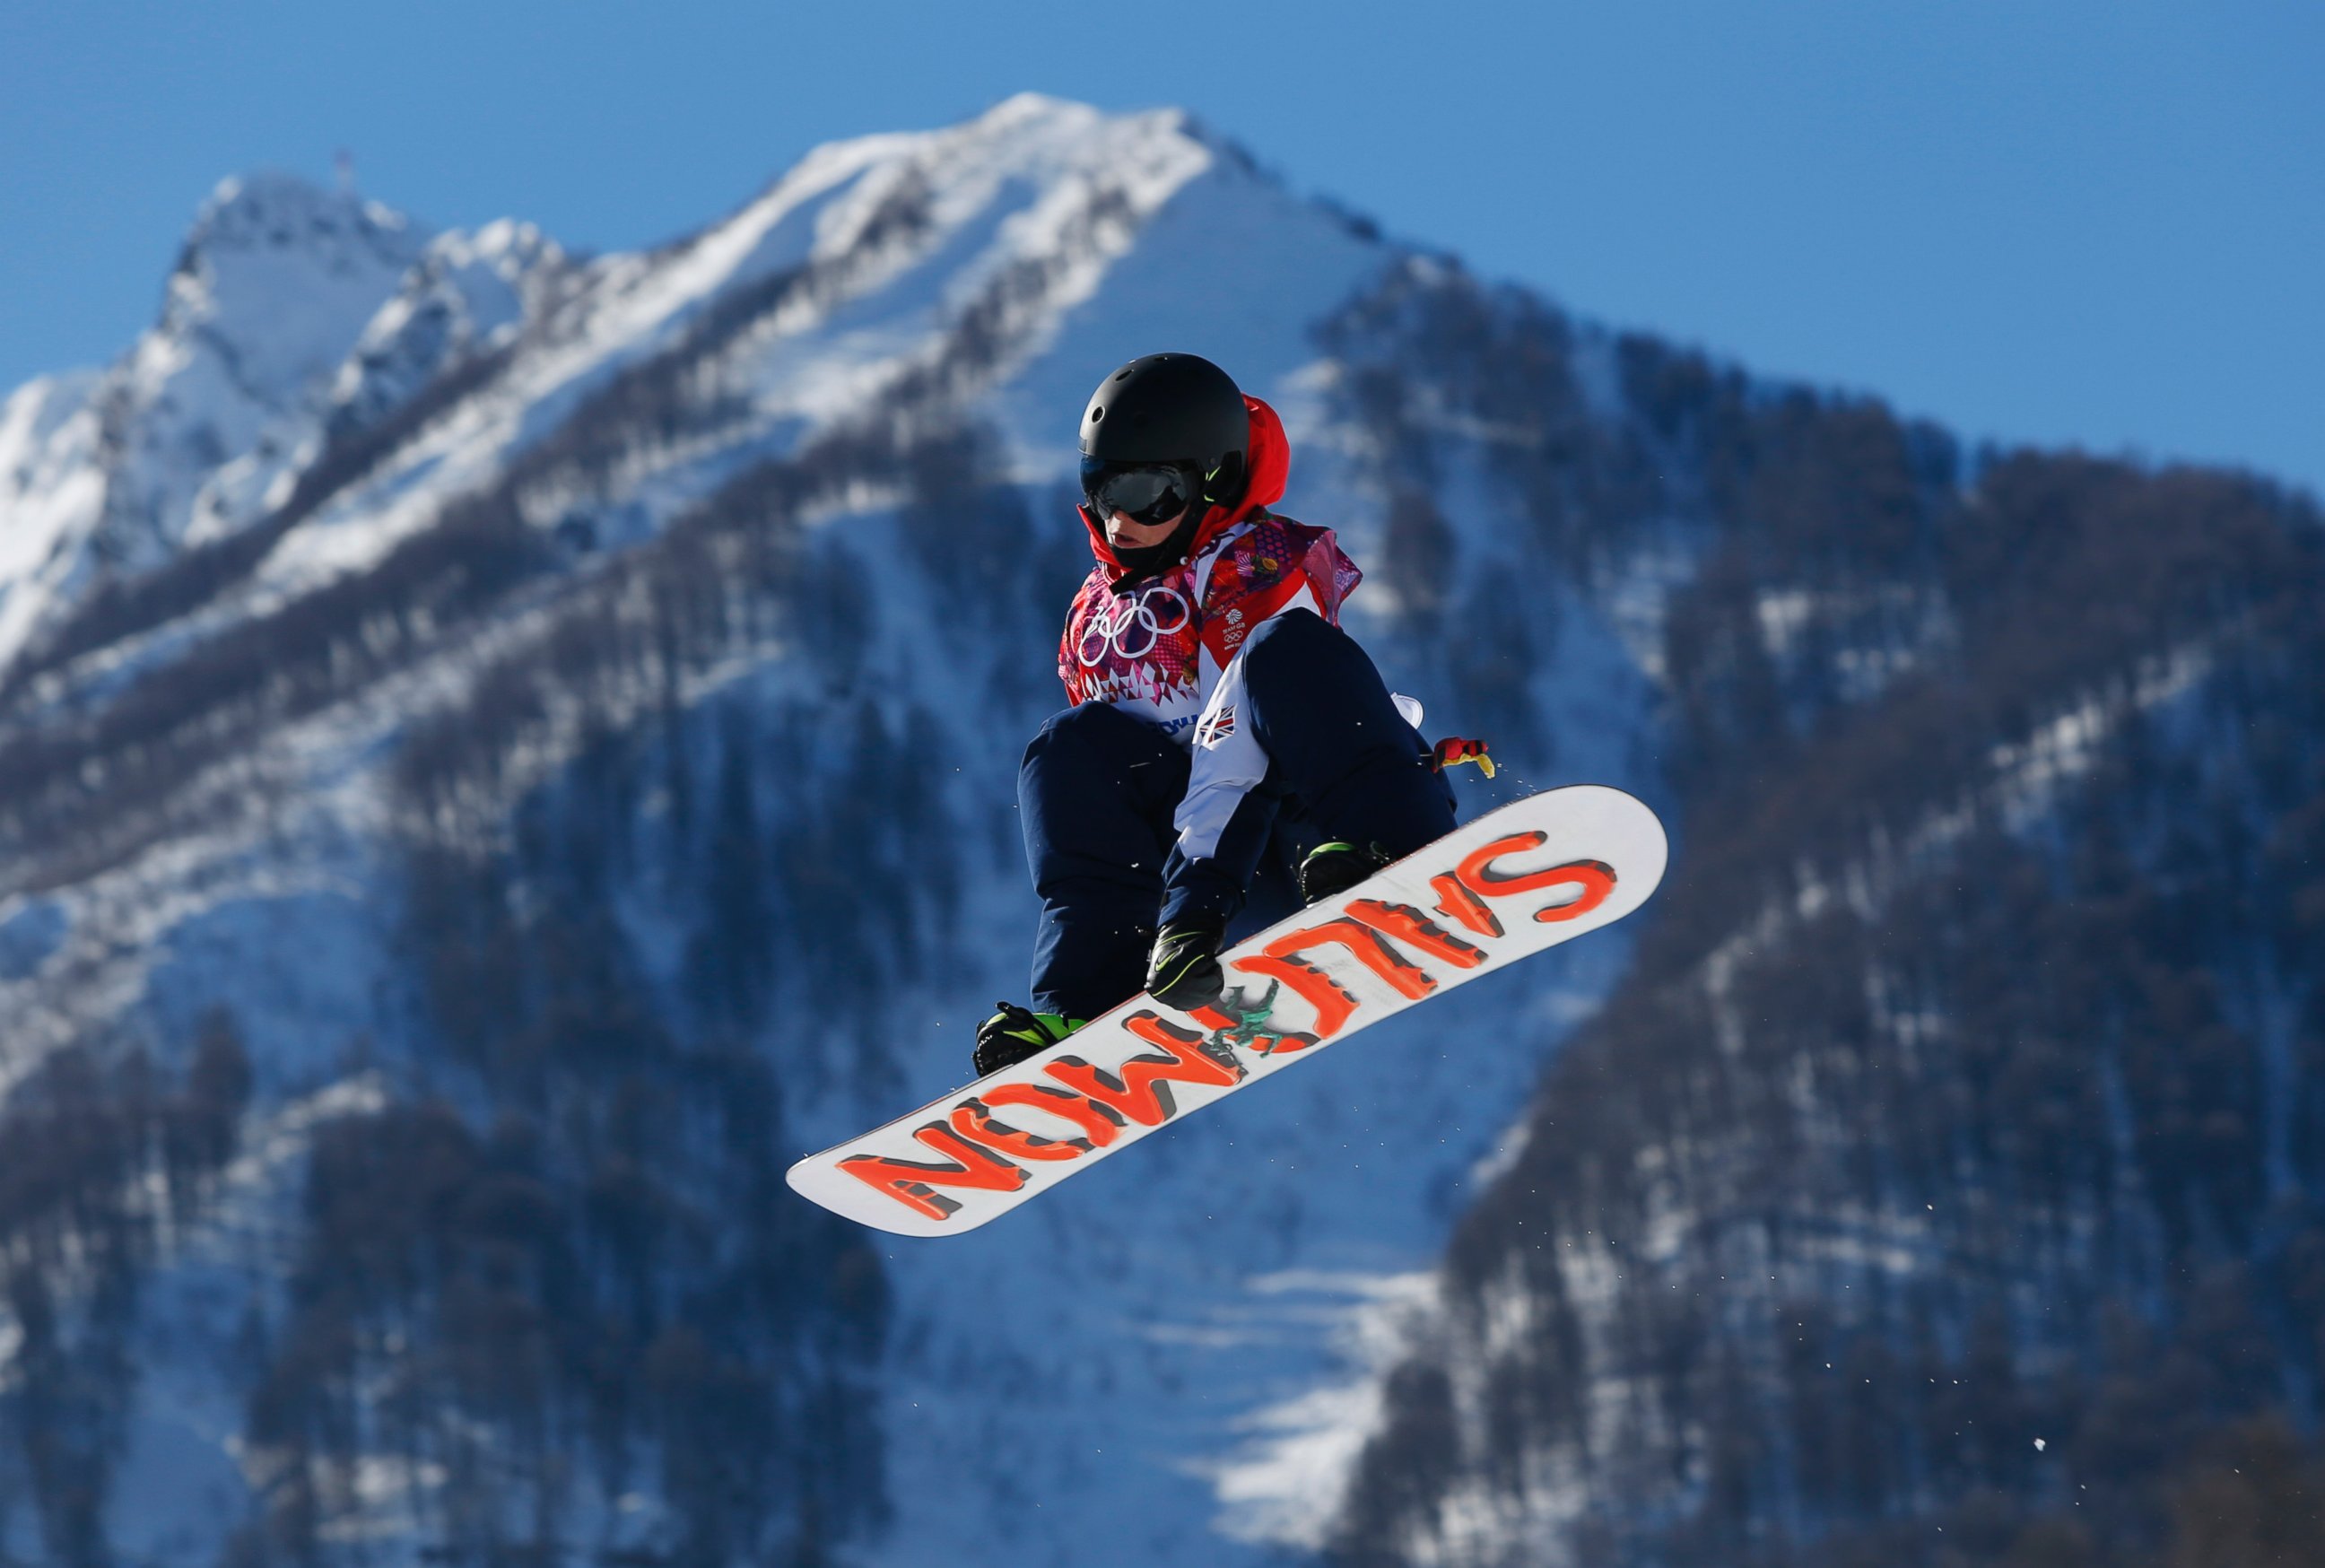 PHOTO: Britain's Jamie Nicholls takes a jump during the men's  snowboard slopestyle final at the Rosa Khutor Extreme Park, at the 2014 Winter Olympics, Feb. 8, 2014, in Krasnaya Polyana, Russia.